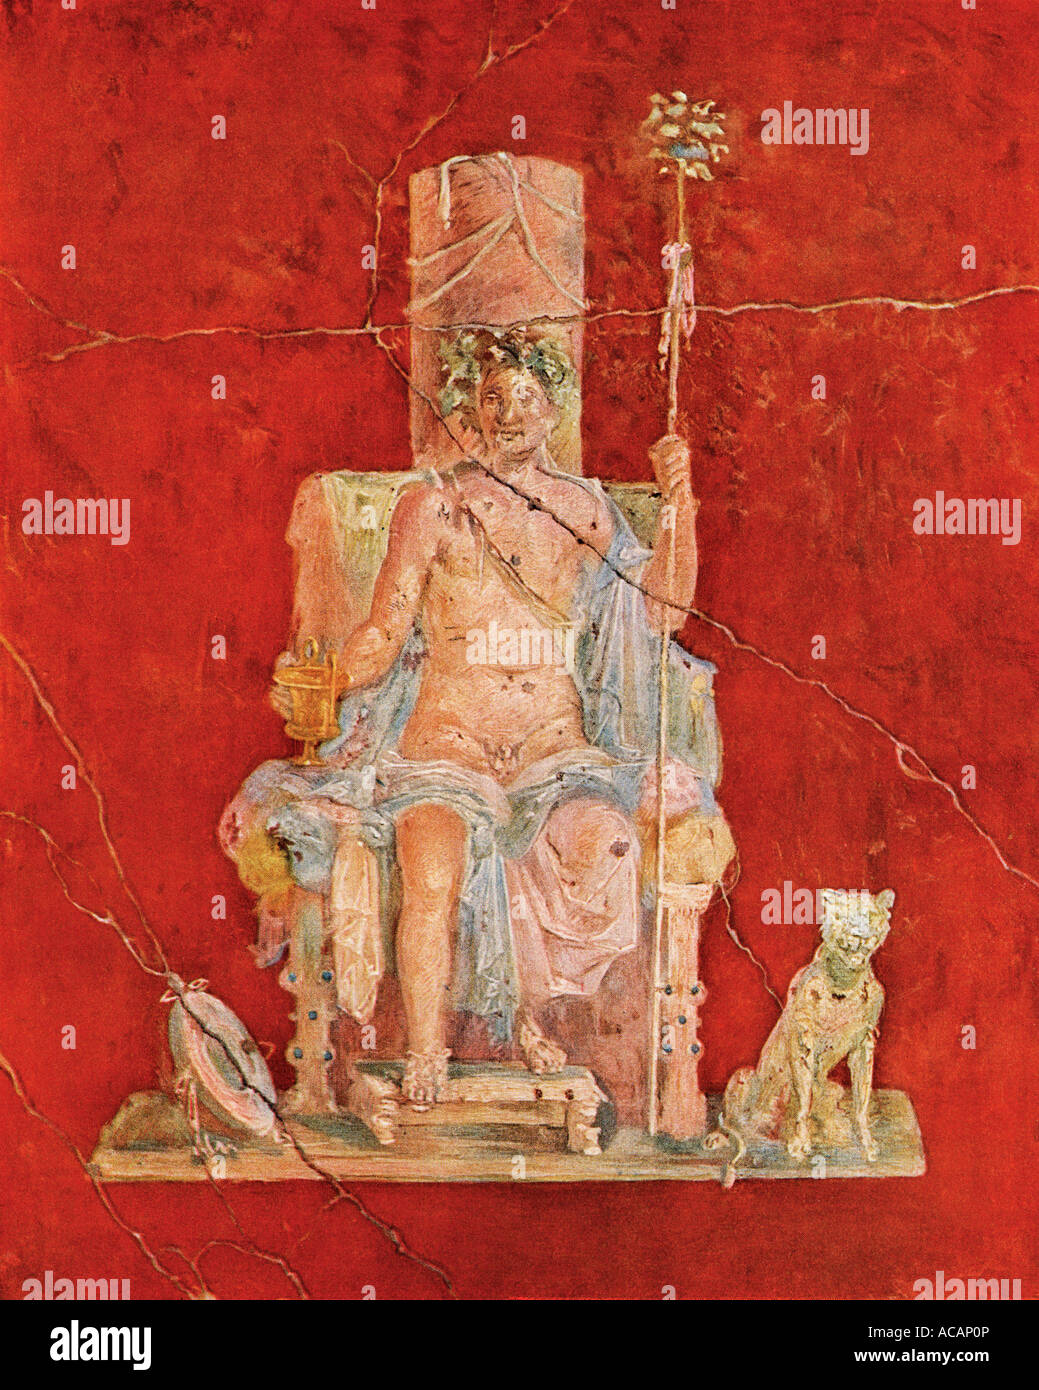 Wall painting of the enthroned Roman deity Dionysus from the ruins of Pompeii. Color lithograph Stock Photo